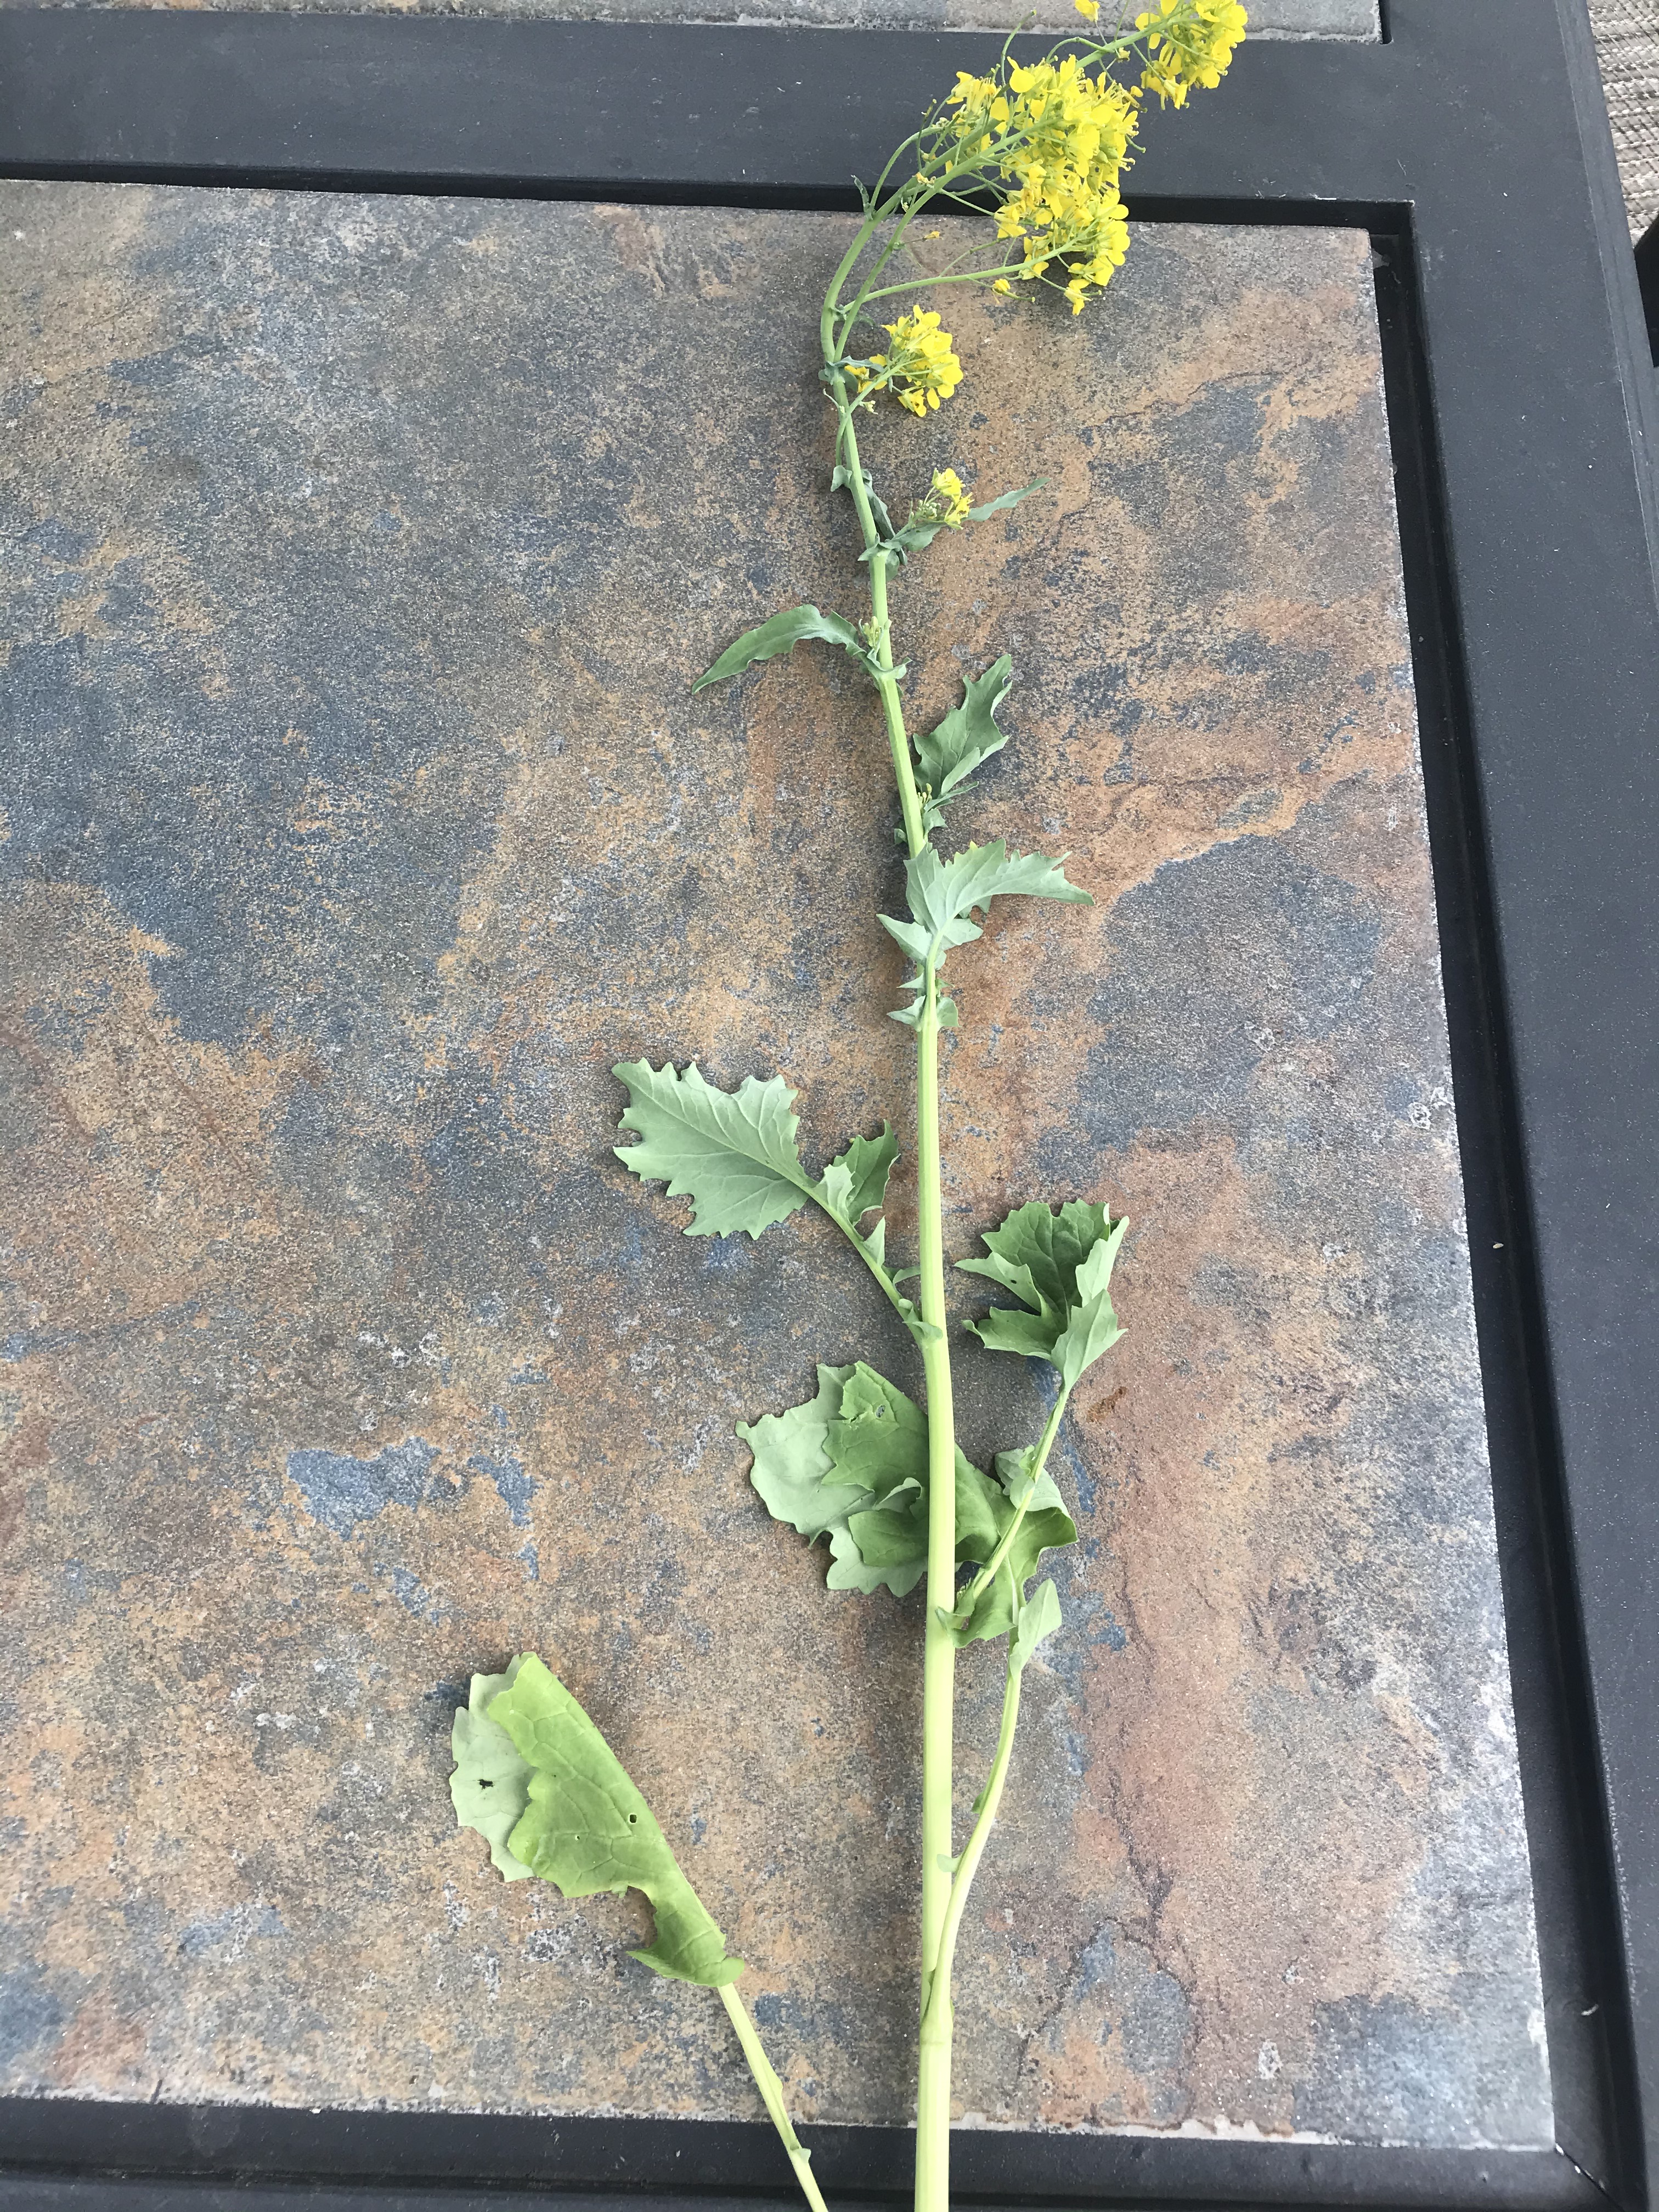 Broccoli rabe gone to seed; the stalk has elongated and the leaves are shriveled and small. Small bright yellow flowers sit atop the stalk.